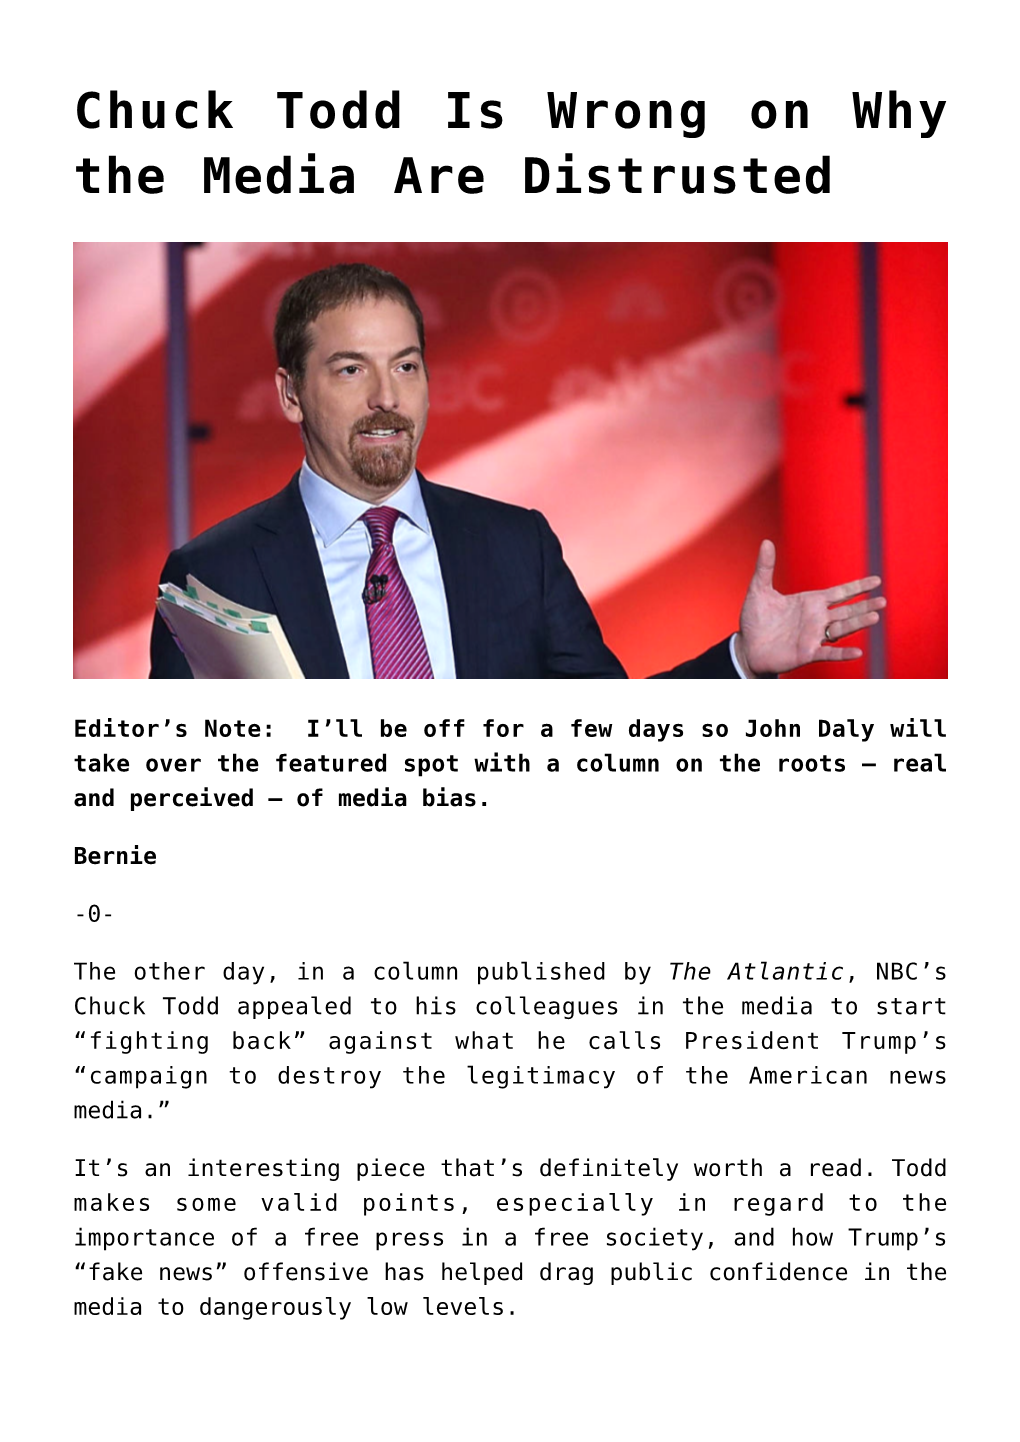 Chuck Todd Is Wrong on Why the Media Are Distrusted